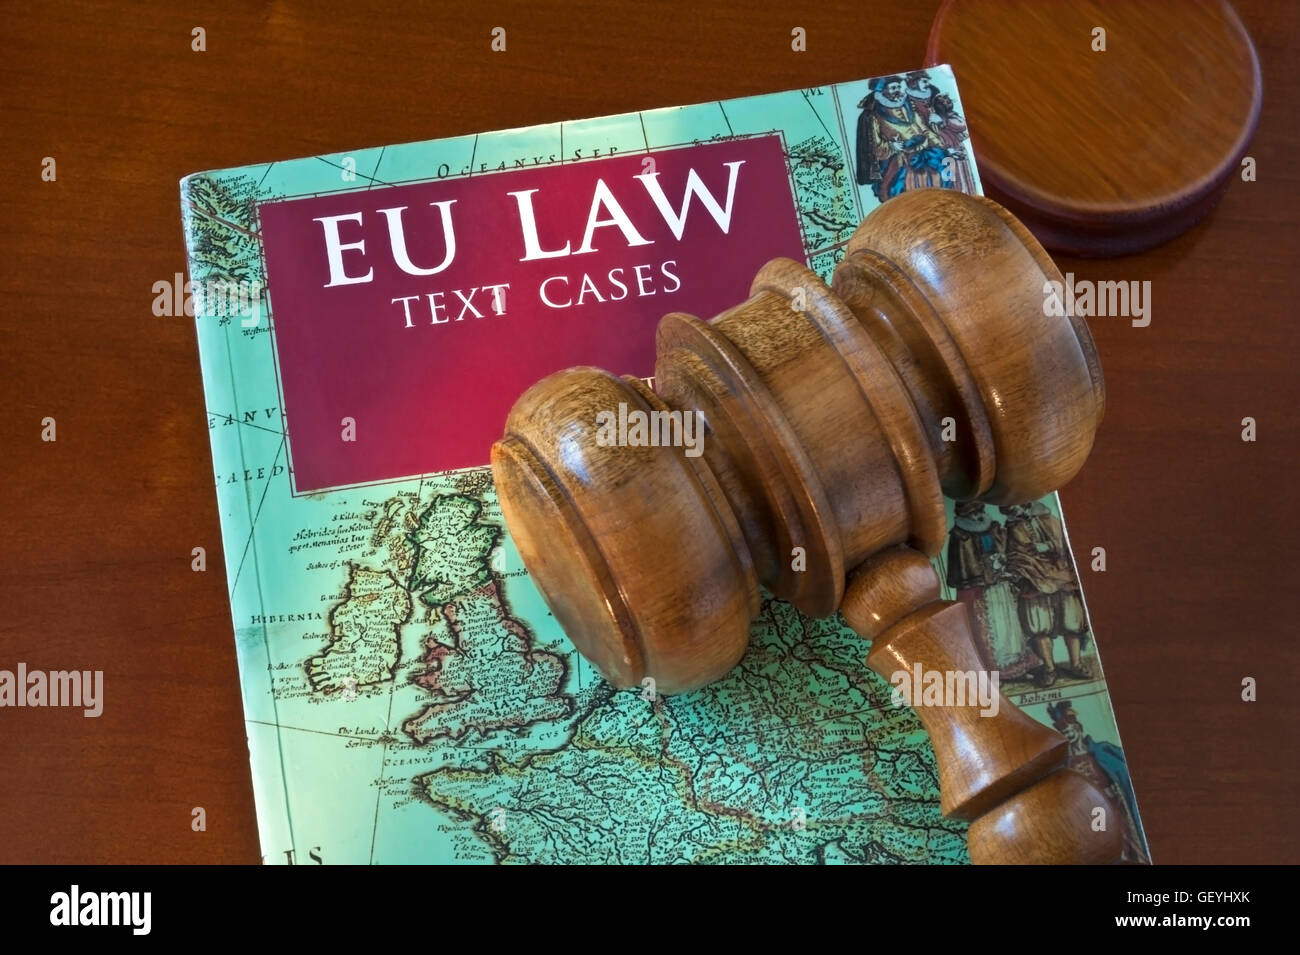 BREXIT Concept image of EU Law book with map of UK and continental Europe front cover, on desk with judges gavel Stock Photo